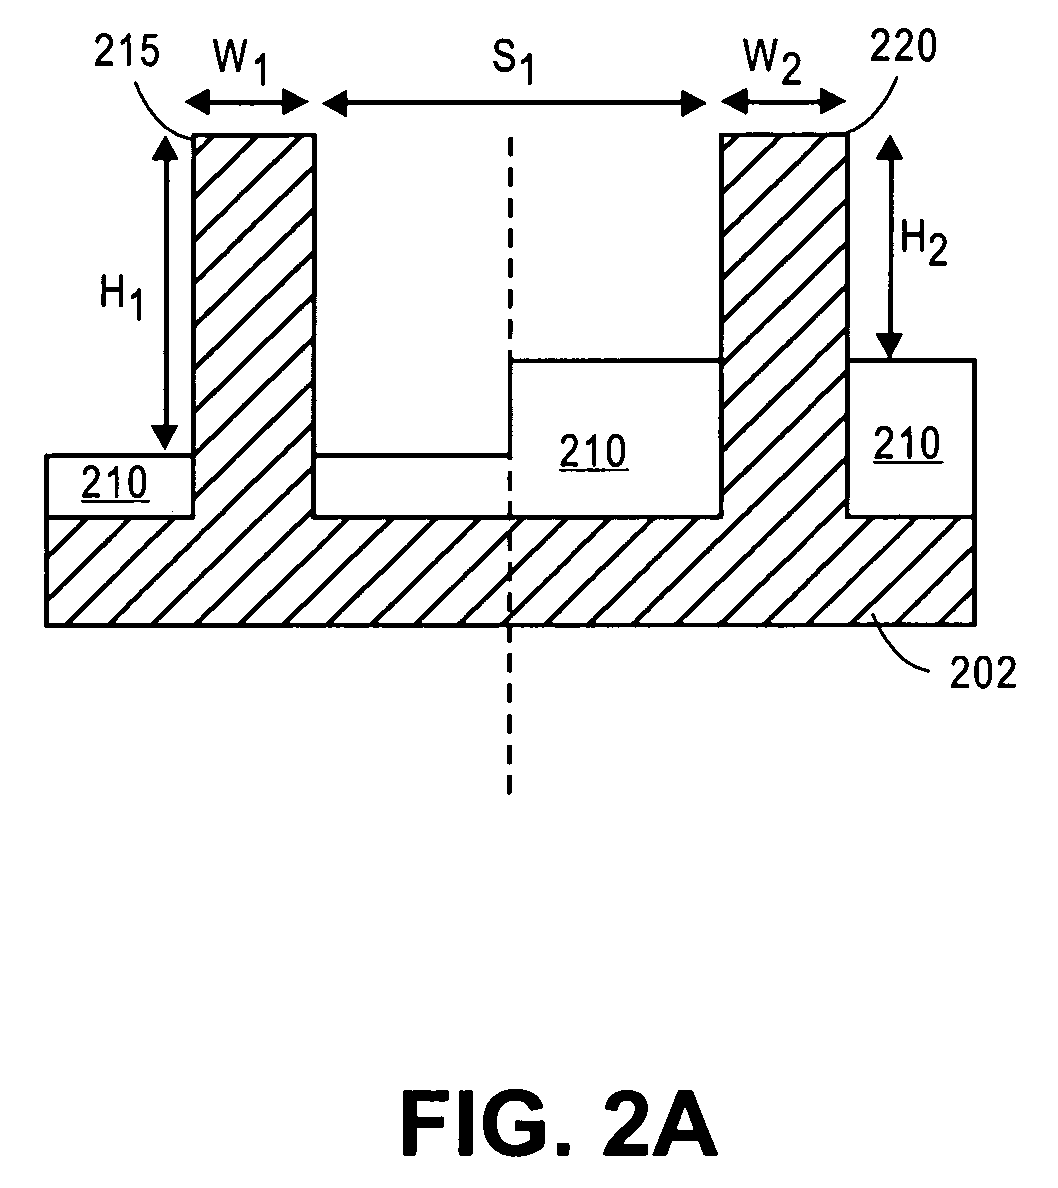 SRAM and logic transistors with variable height multi-gate transistor architecture